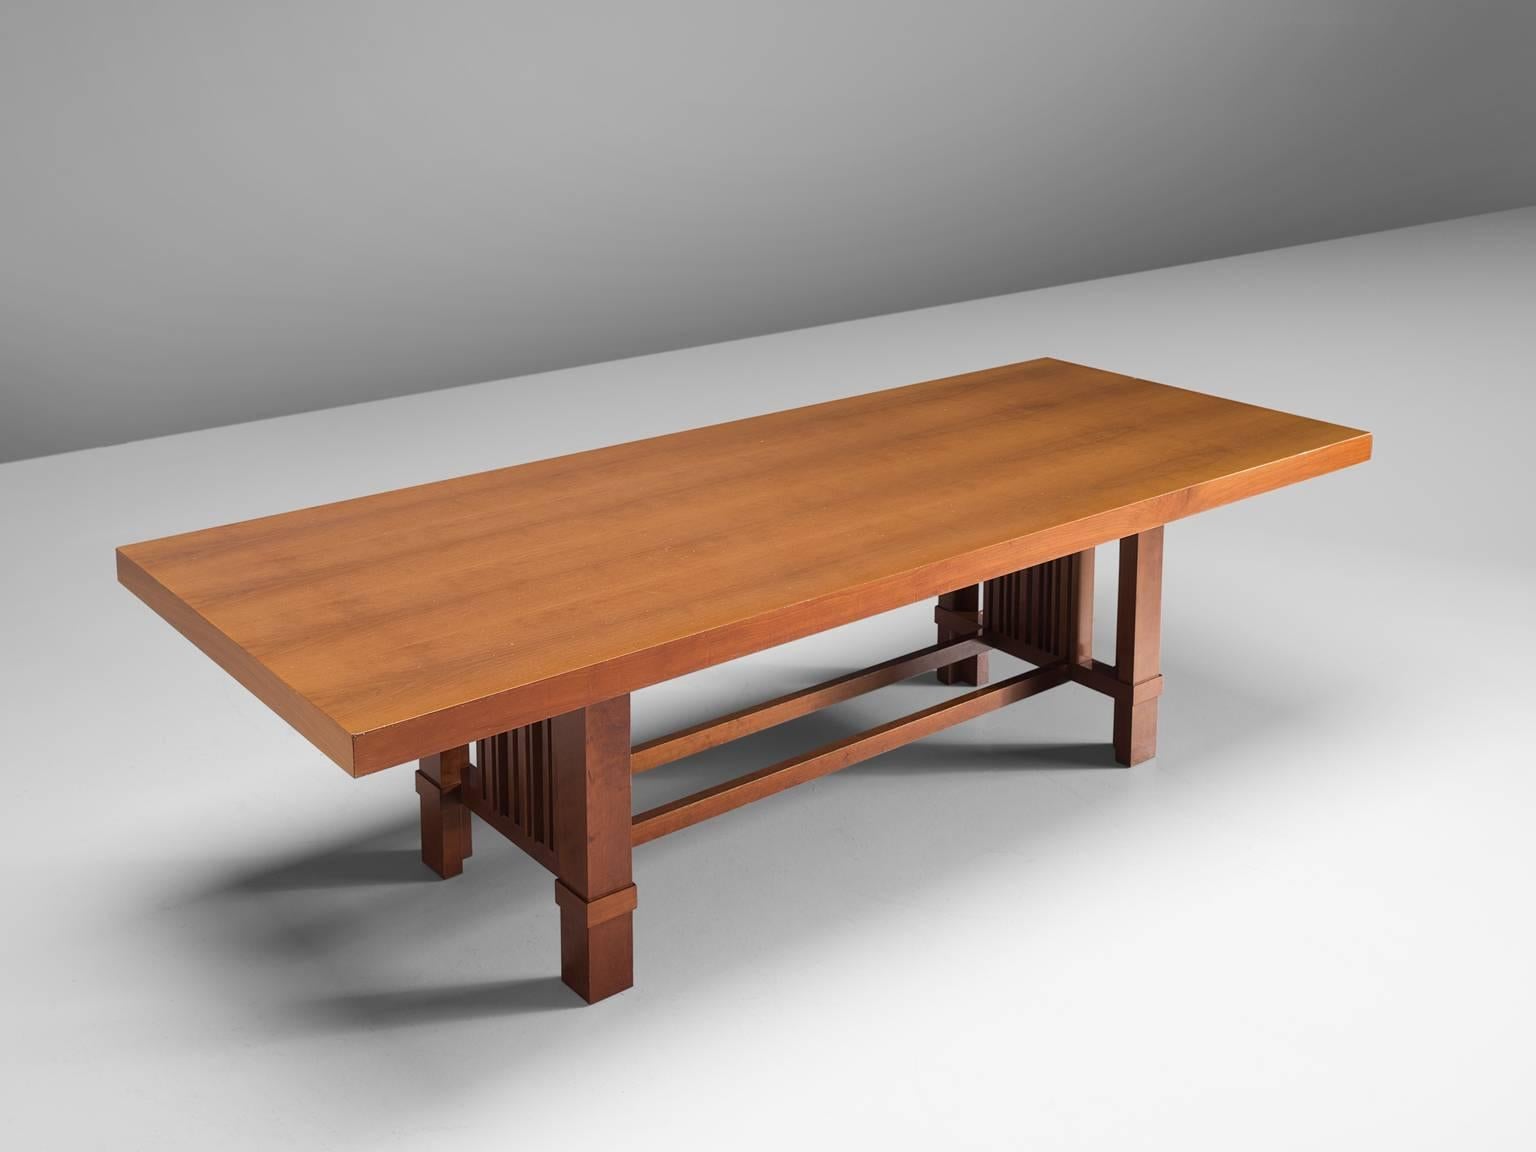 Frank Lloyd Wright for Cassina, 608 Taliesin table, cherry, design 1917, production 1989, United States,

This taliesin table is designed by Frank Lloyd Wright and produced by Cassina. The table has an incredibly architectural shape and form. The